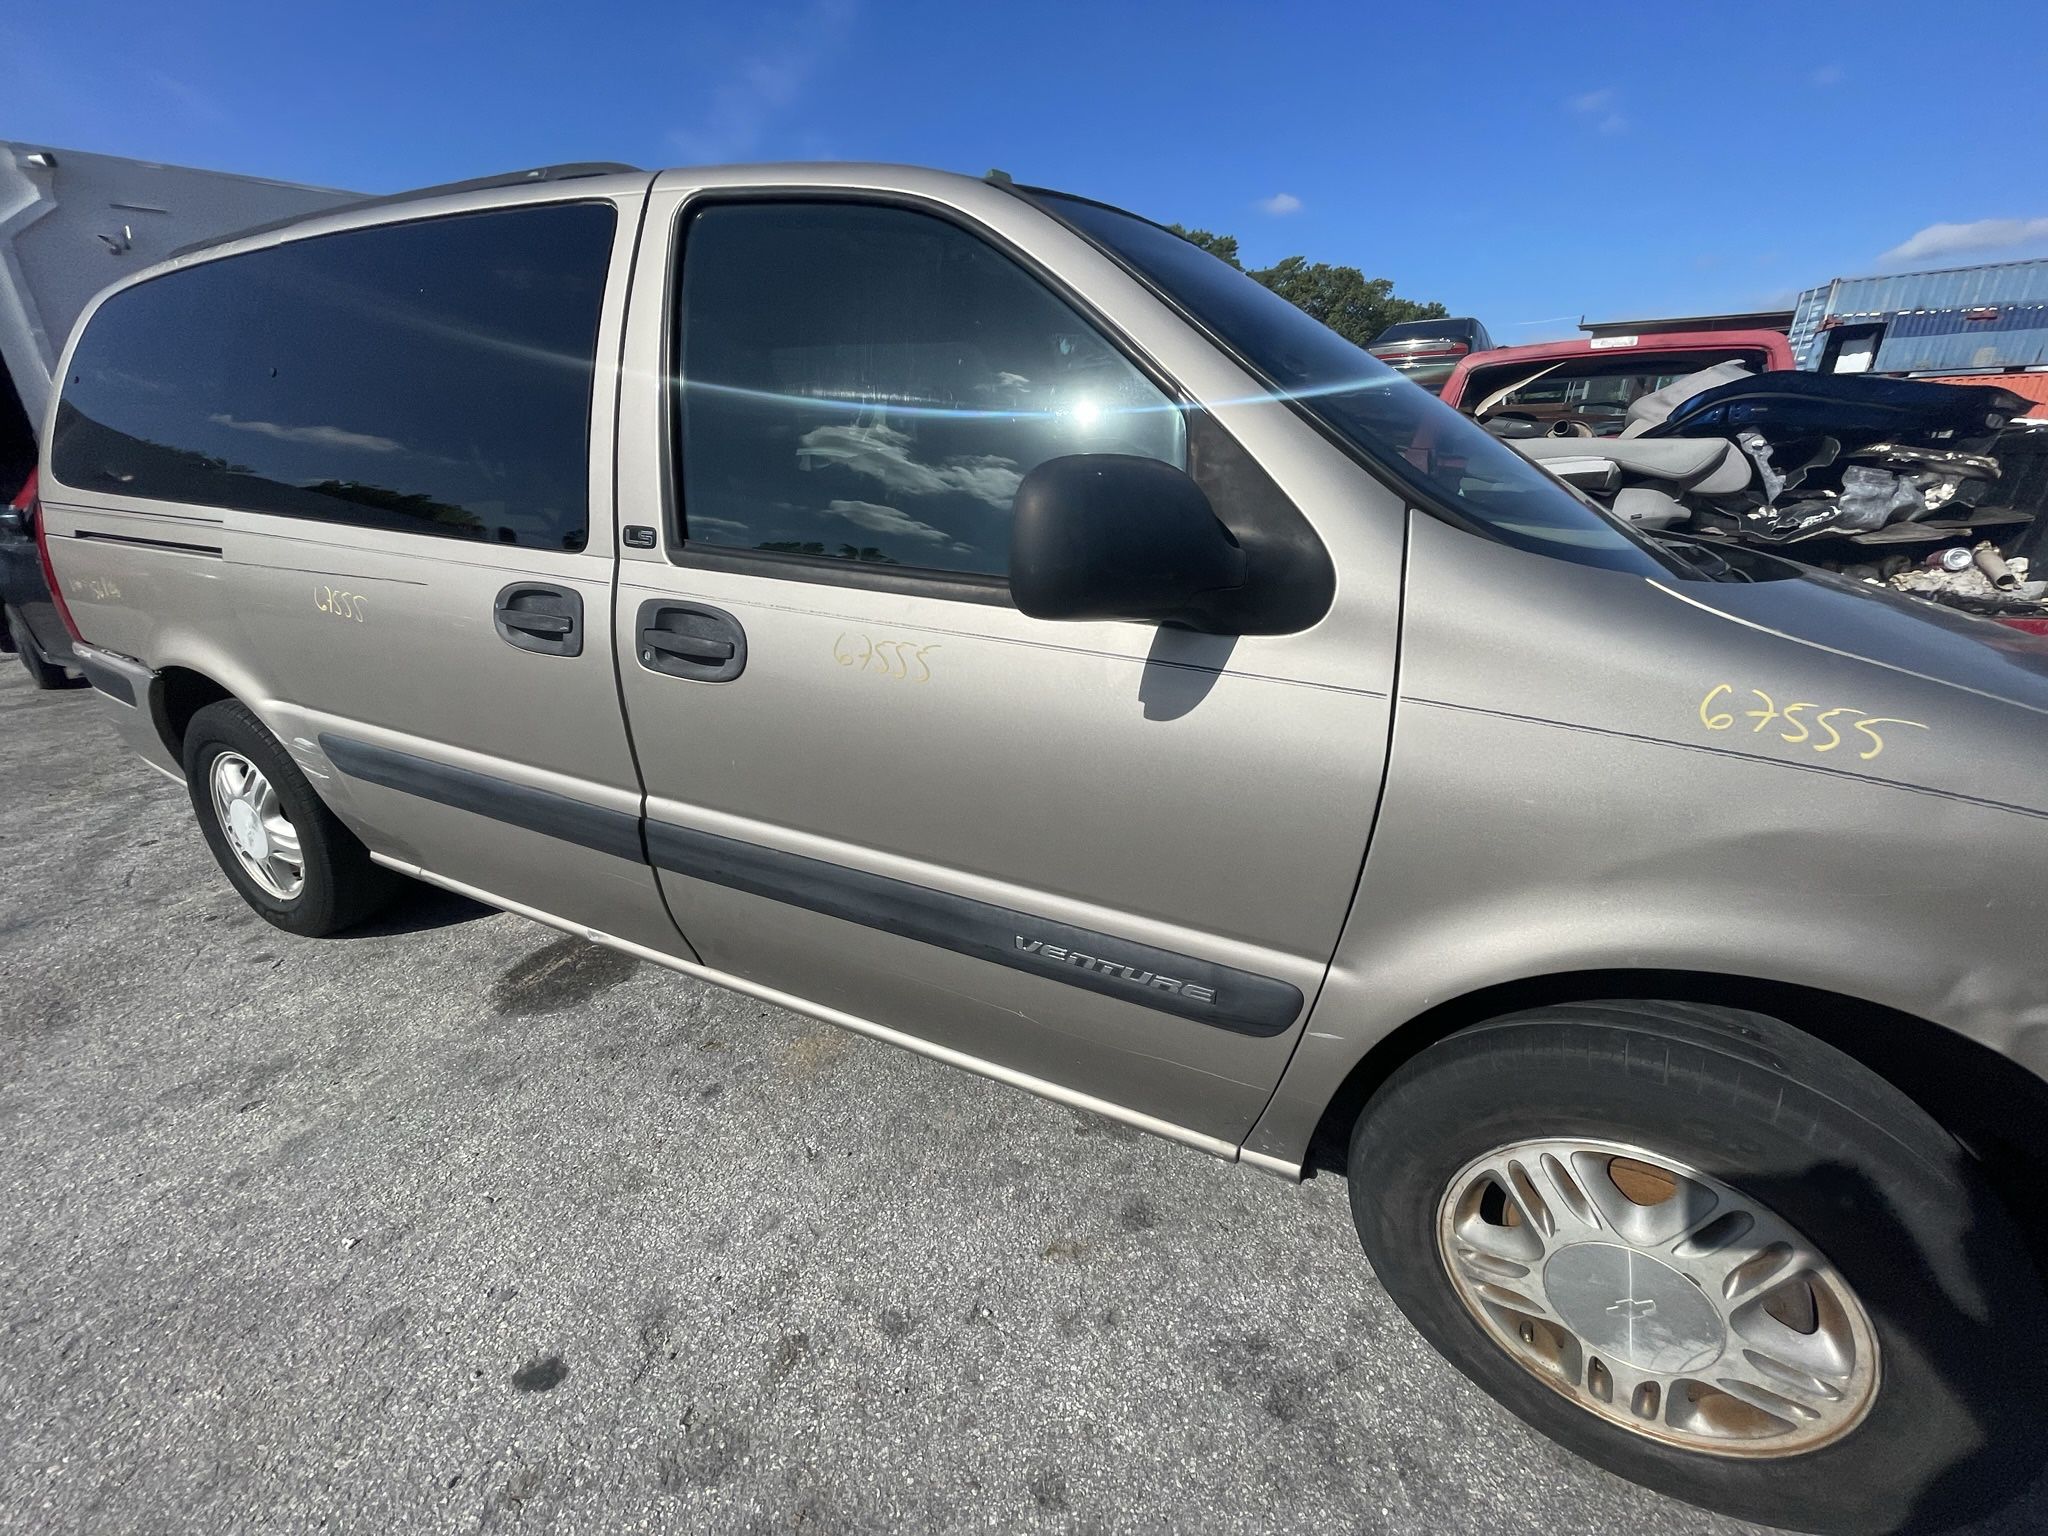 For Parts 2001 Chevy Venture 